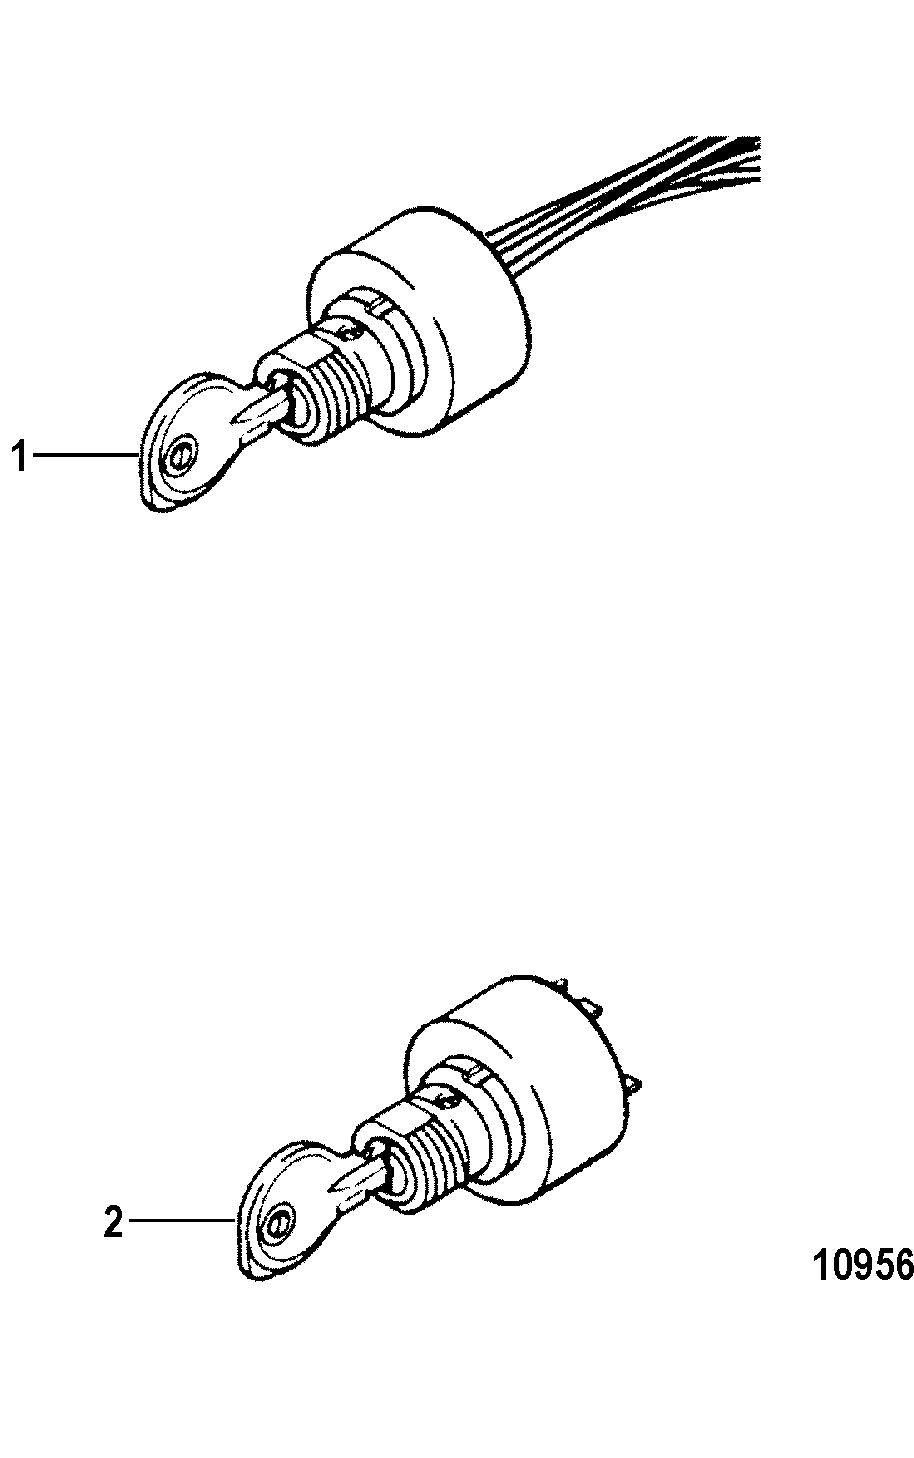 ACCESSORIES STEERING SYSTEMS AND COMPONENTS Key Chart-Ignition Switch(89491 and  30431 Series)